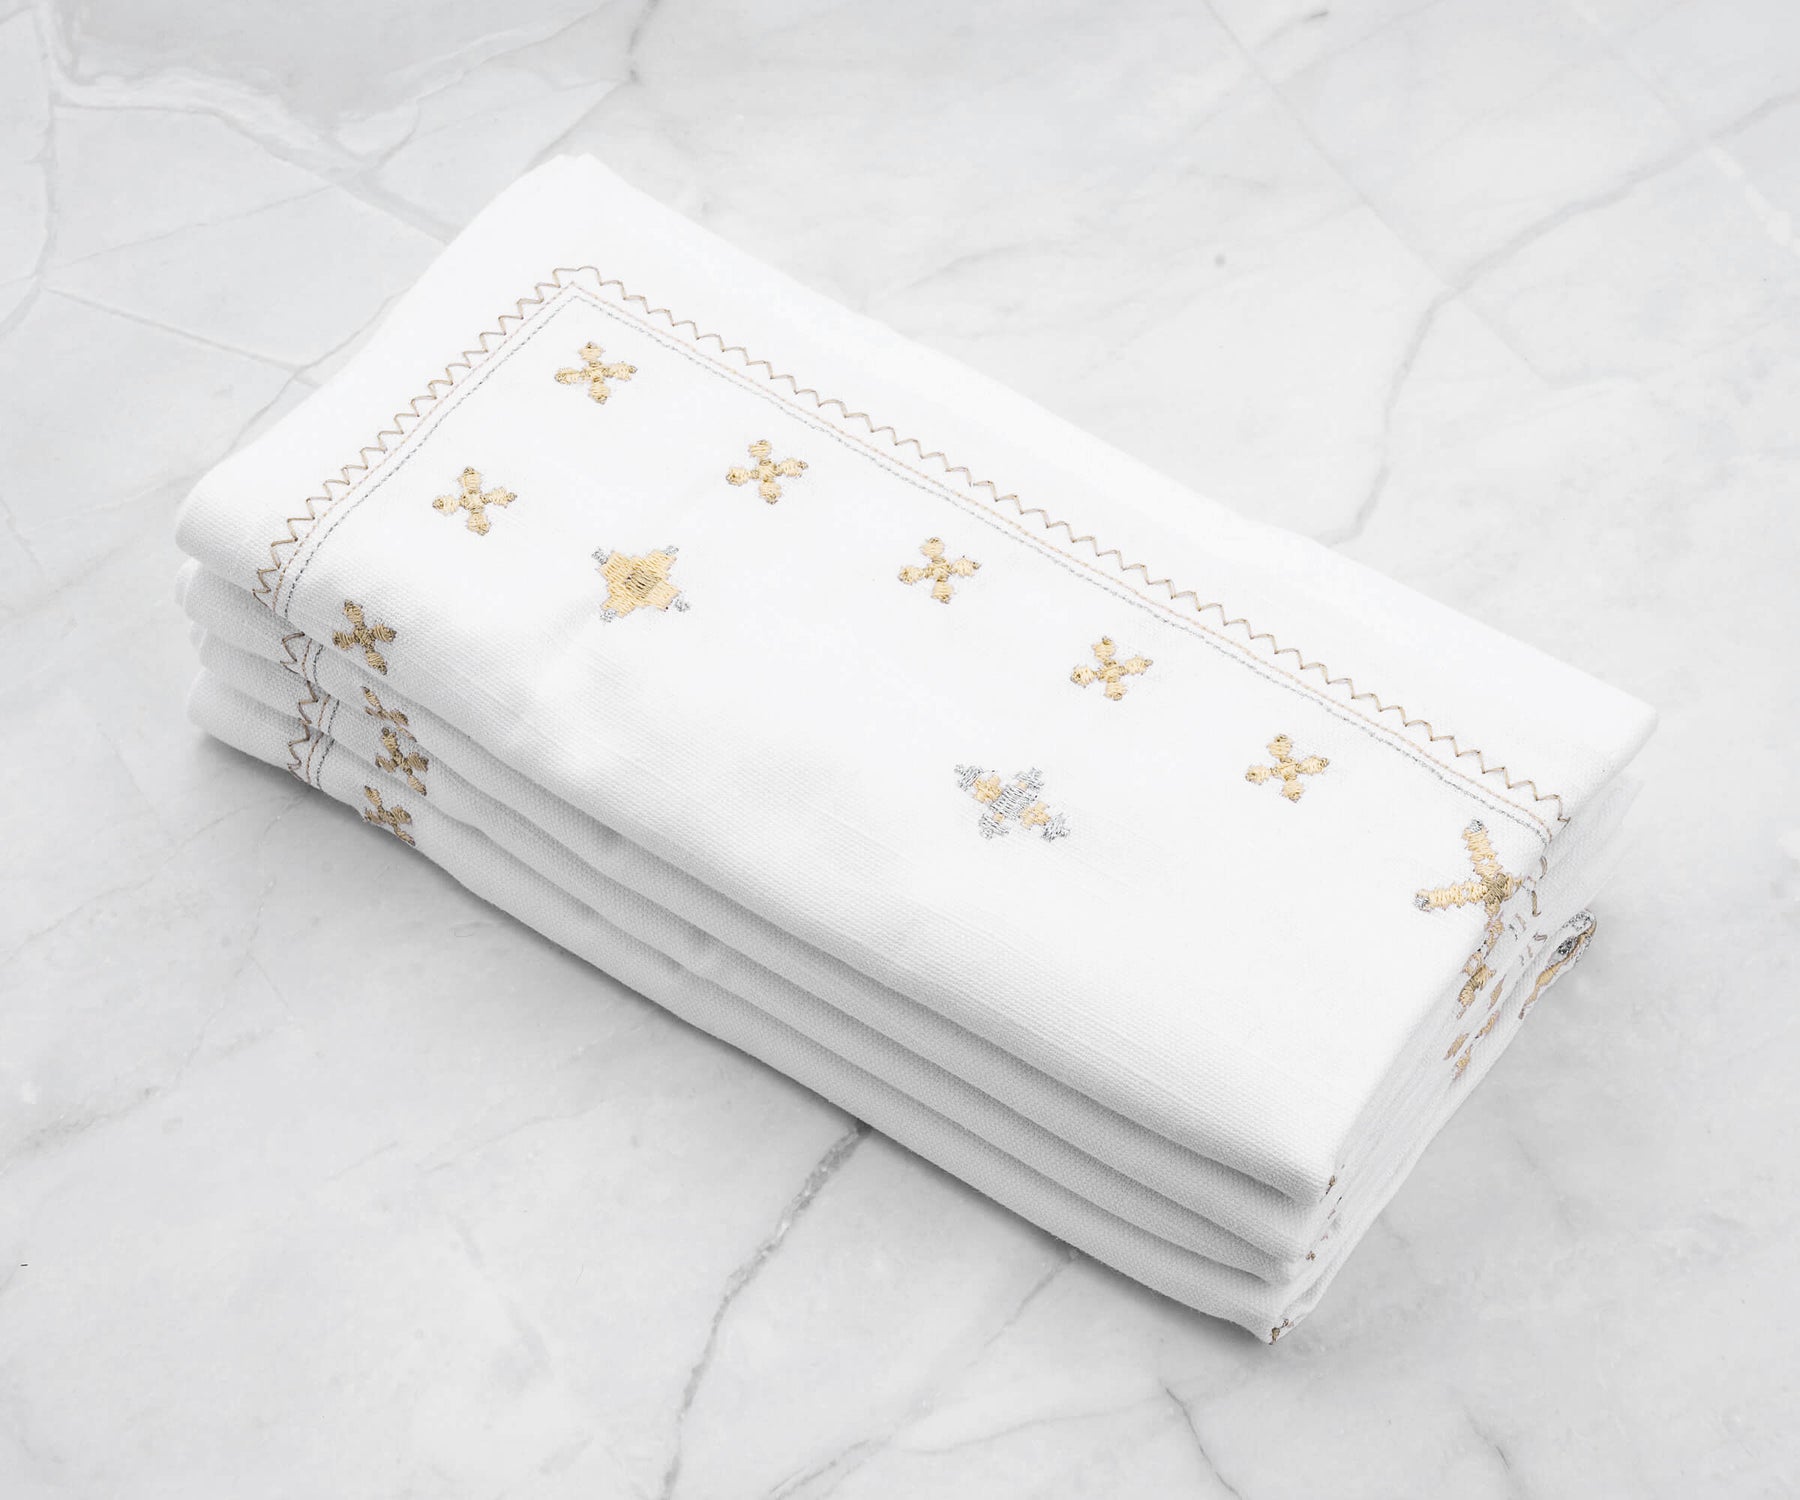 emstitching: Some embroidered napkins feature hemstitched borders or edges, enhancing the overall aesthetic appeal and providing a finished look.